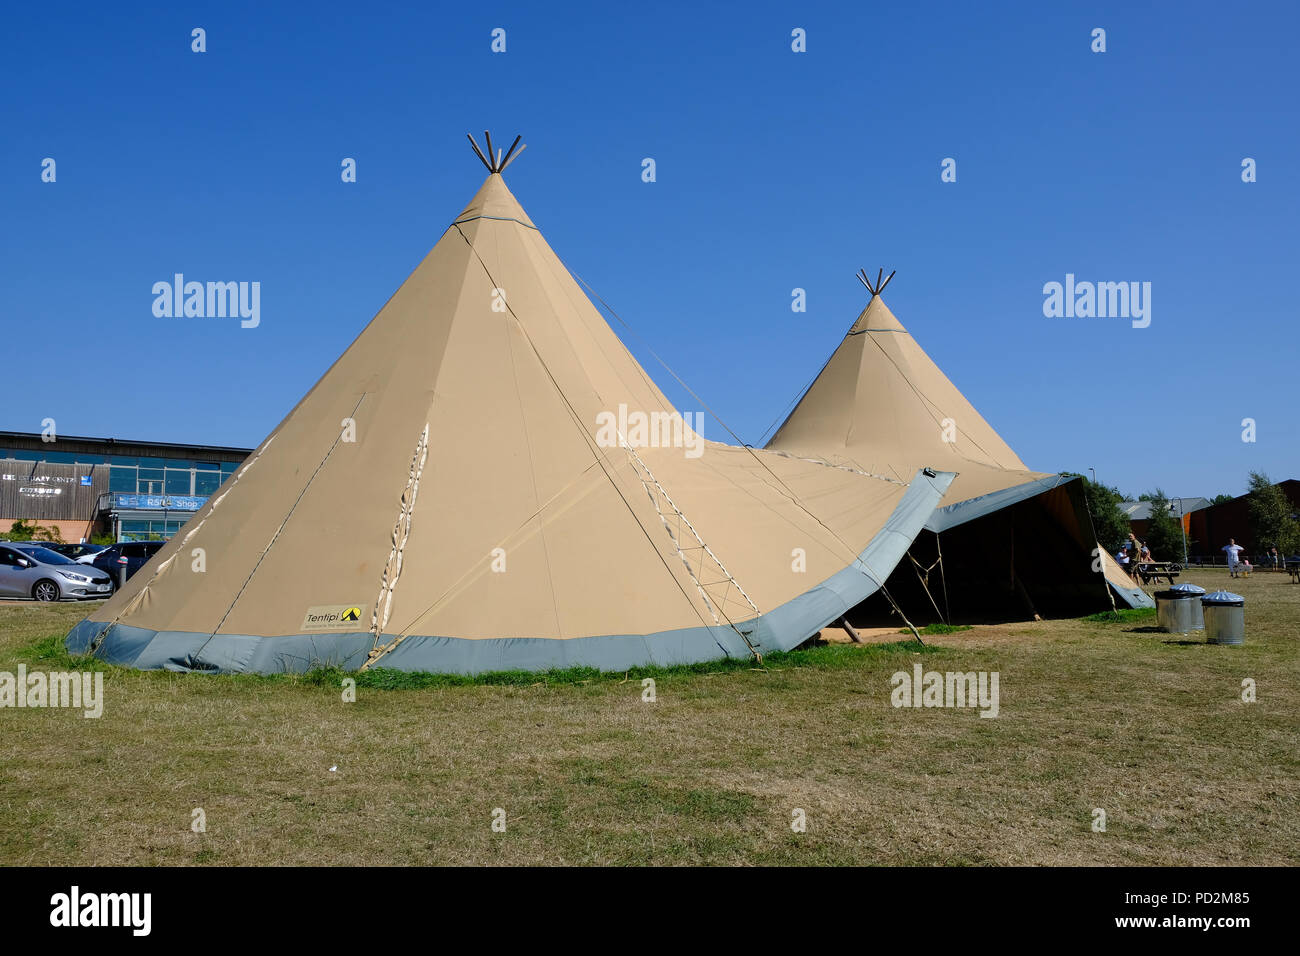 Topsham, Devon, UK. A large Nordic Teepee tent is setup at Darts Farm for shoppers to use and enjoy as a picnic spot Stock Photo